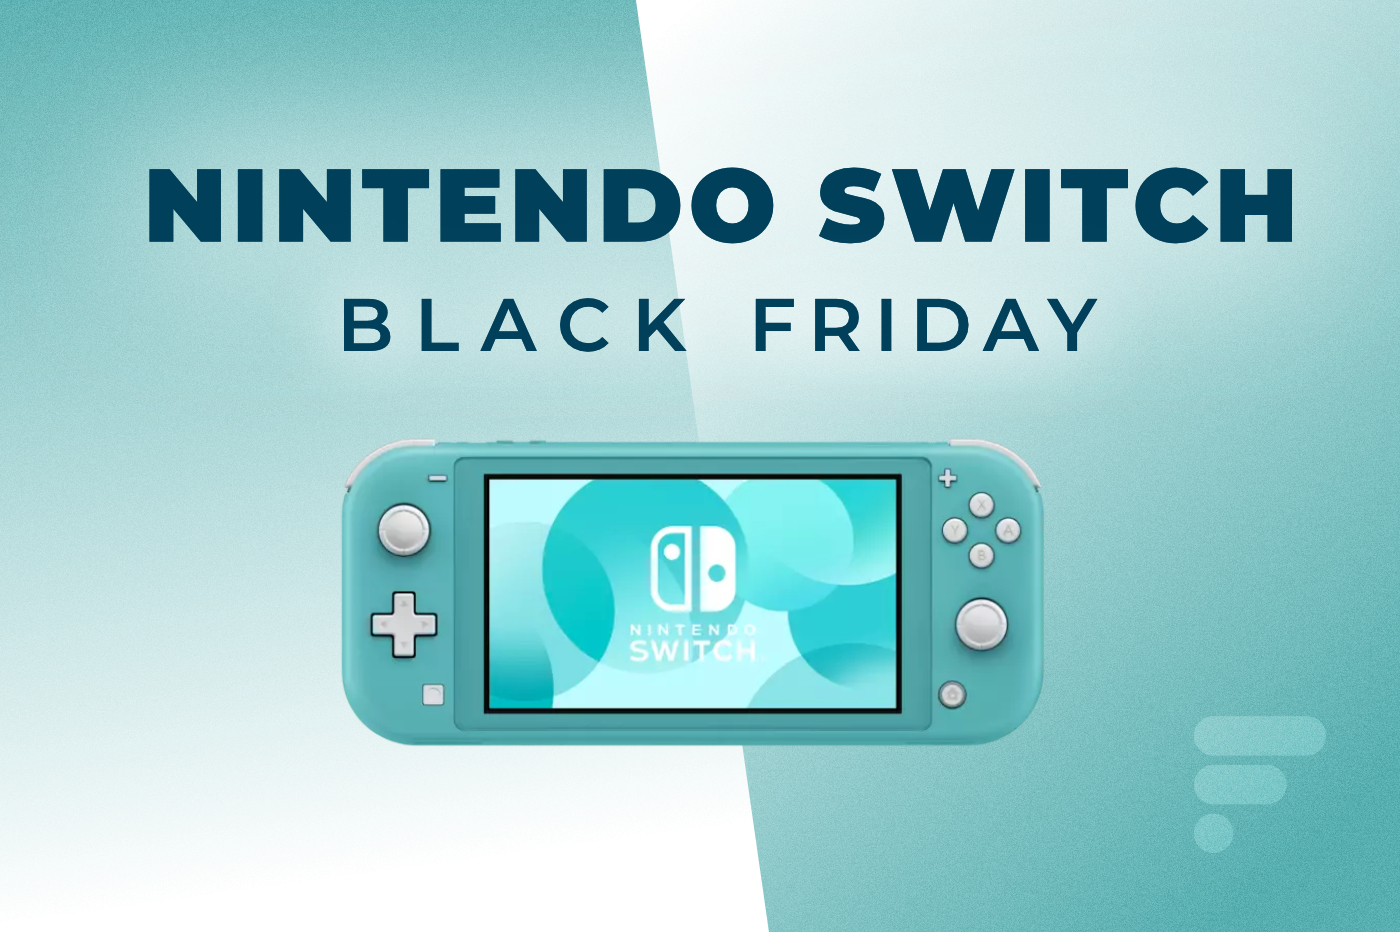 what is the best price for a nintendo switch